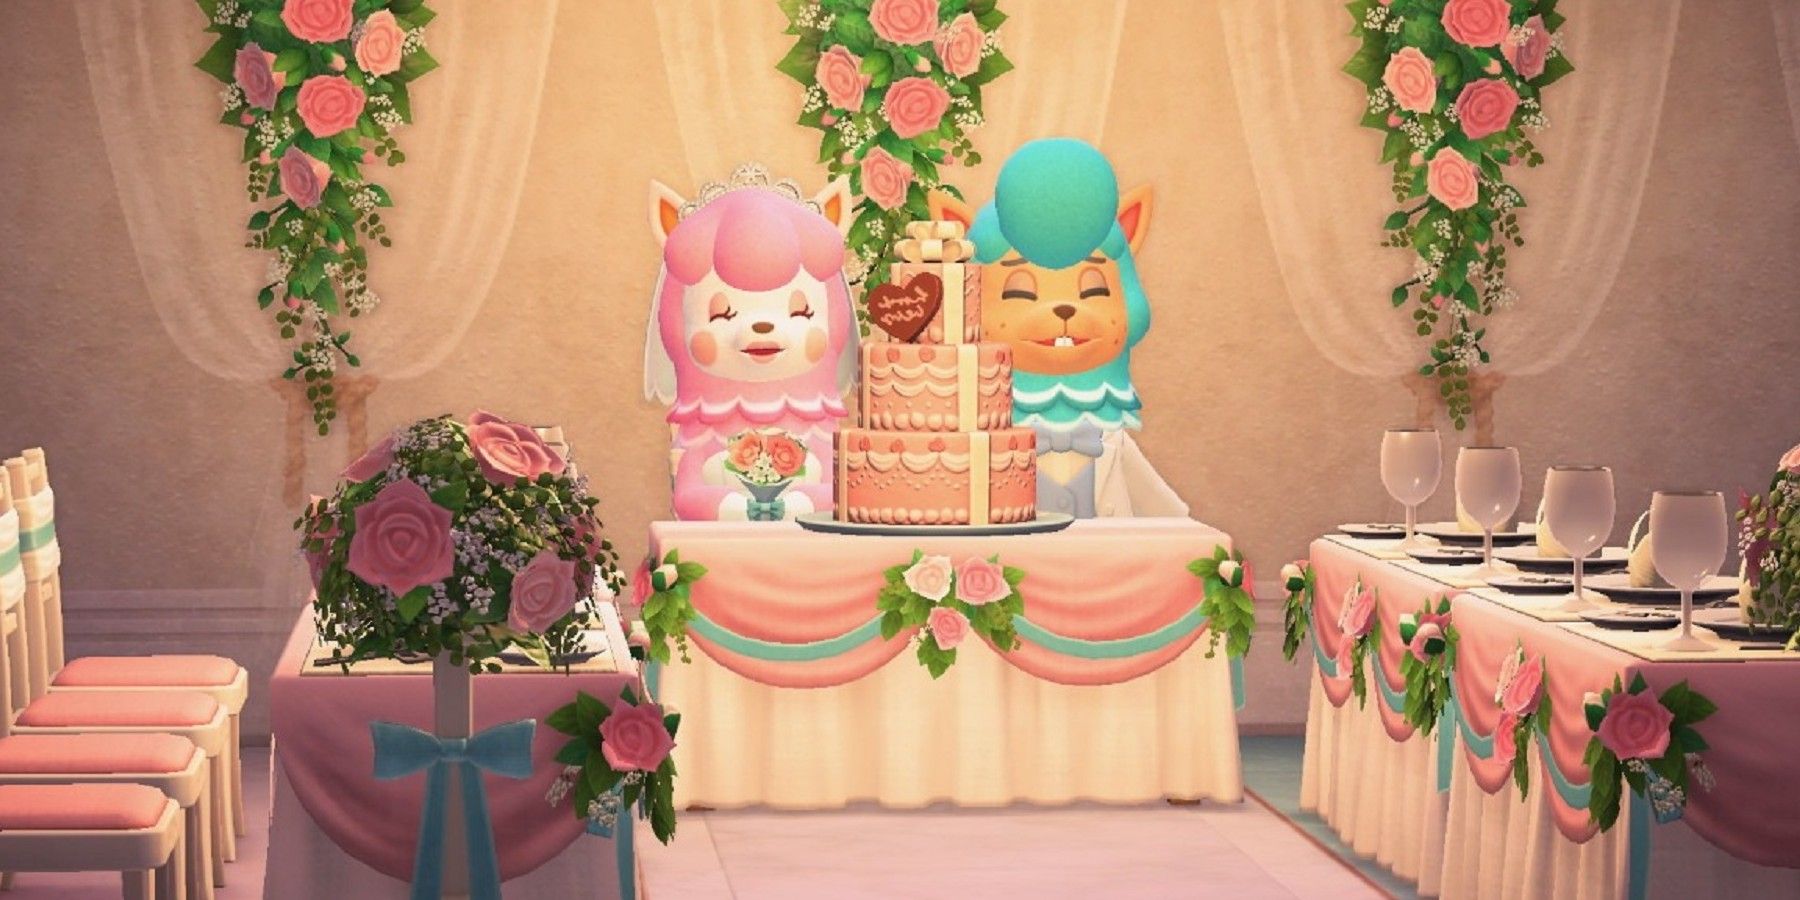 Animal Crossing Fan Creates Unique Wedding Cake Toppers